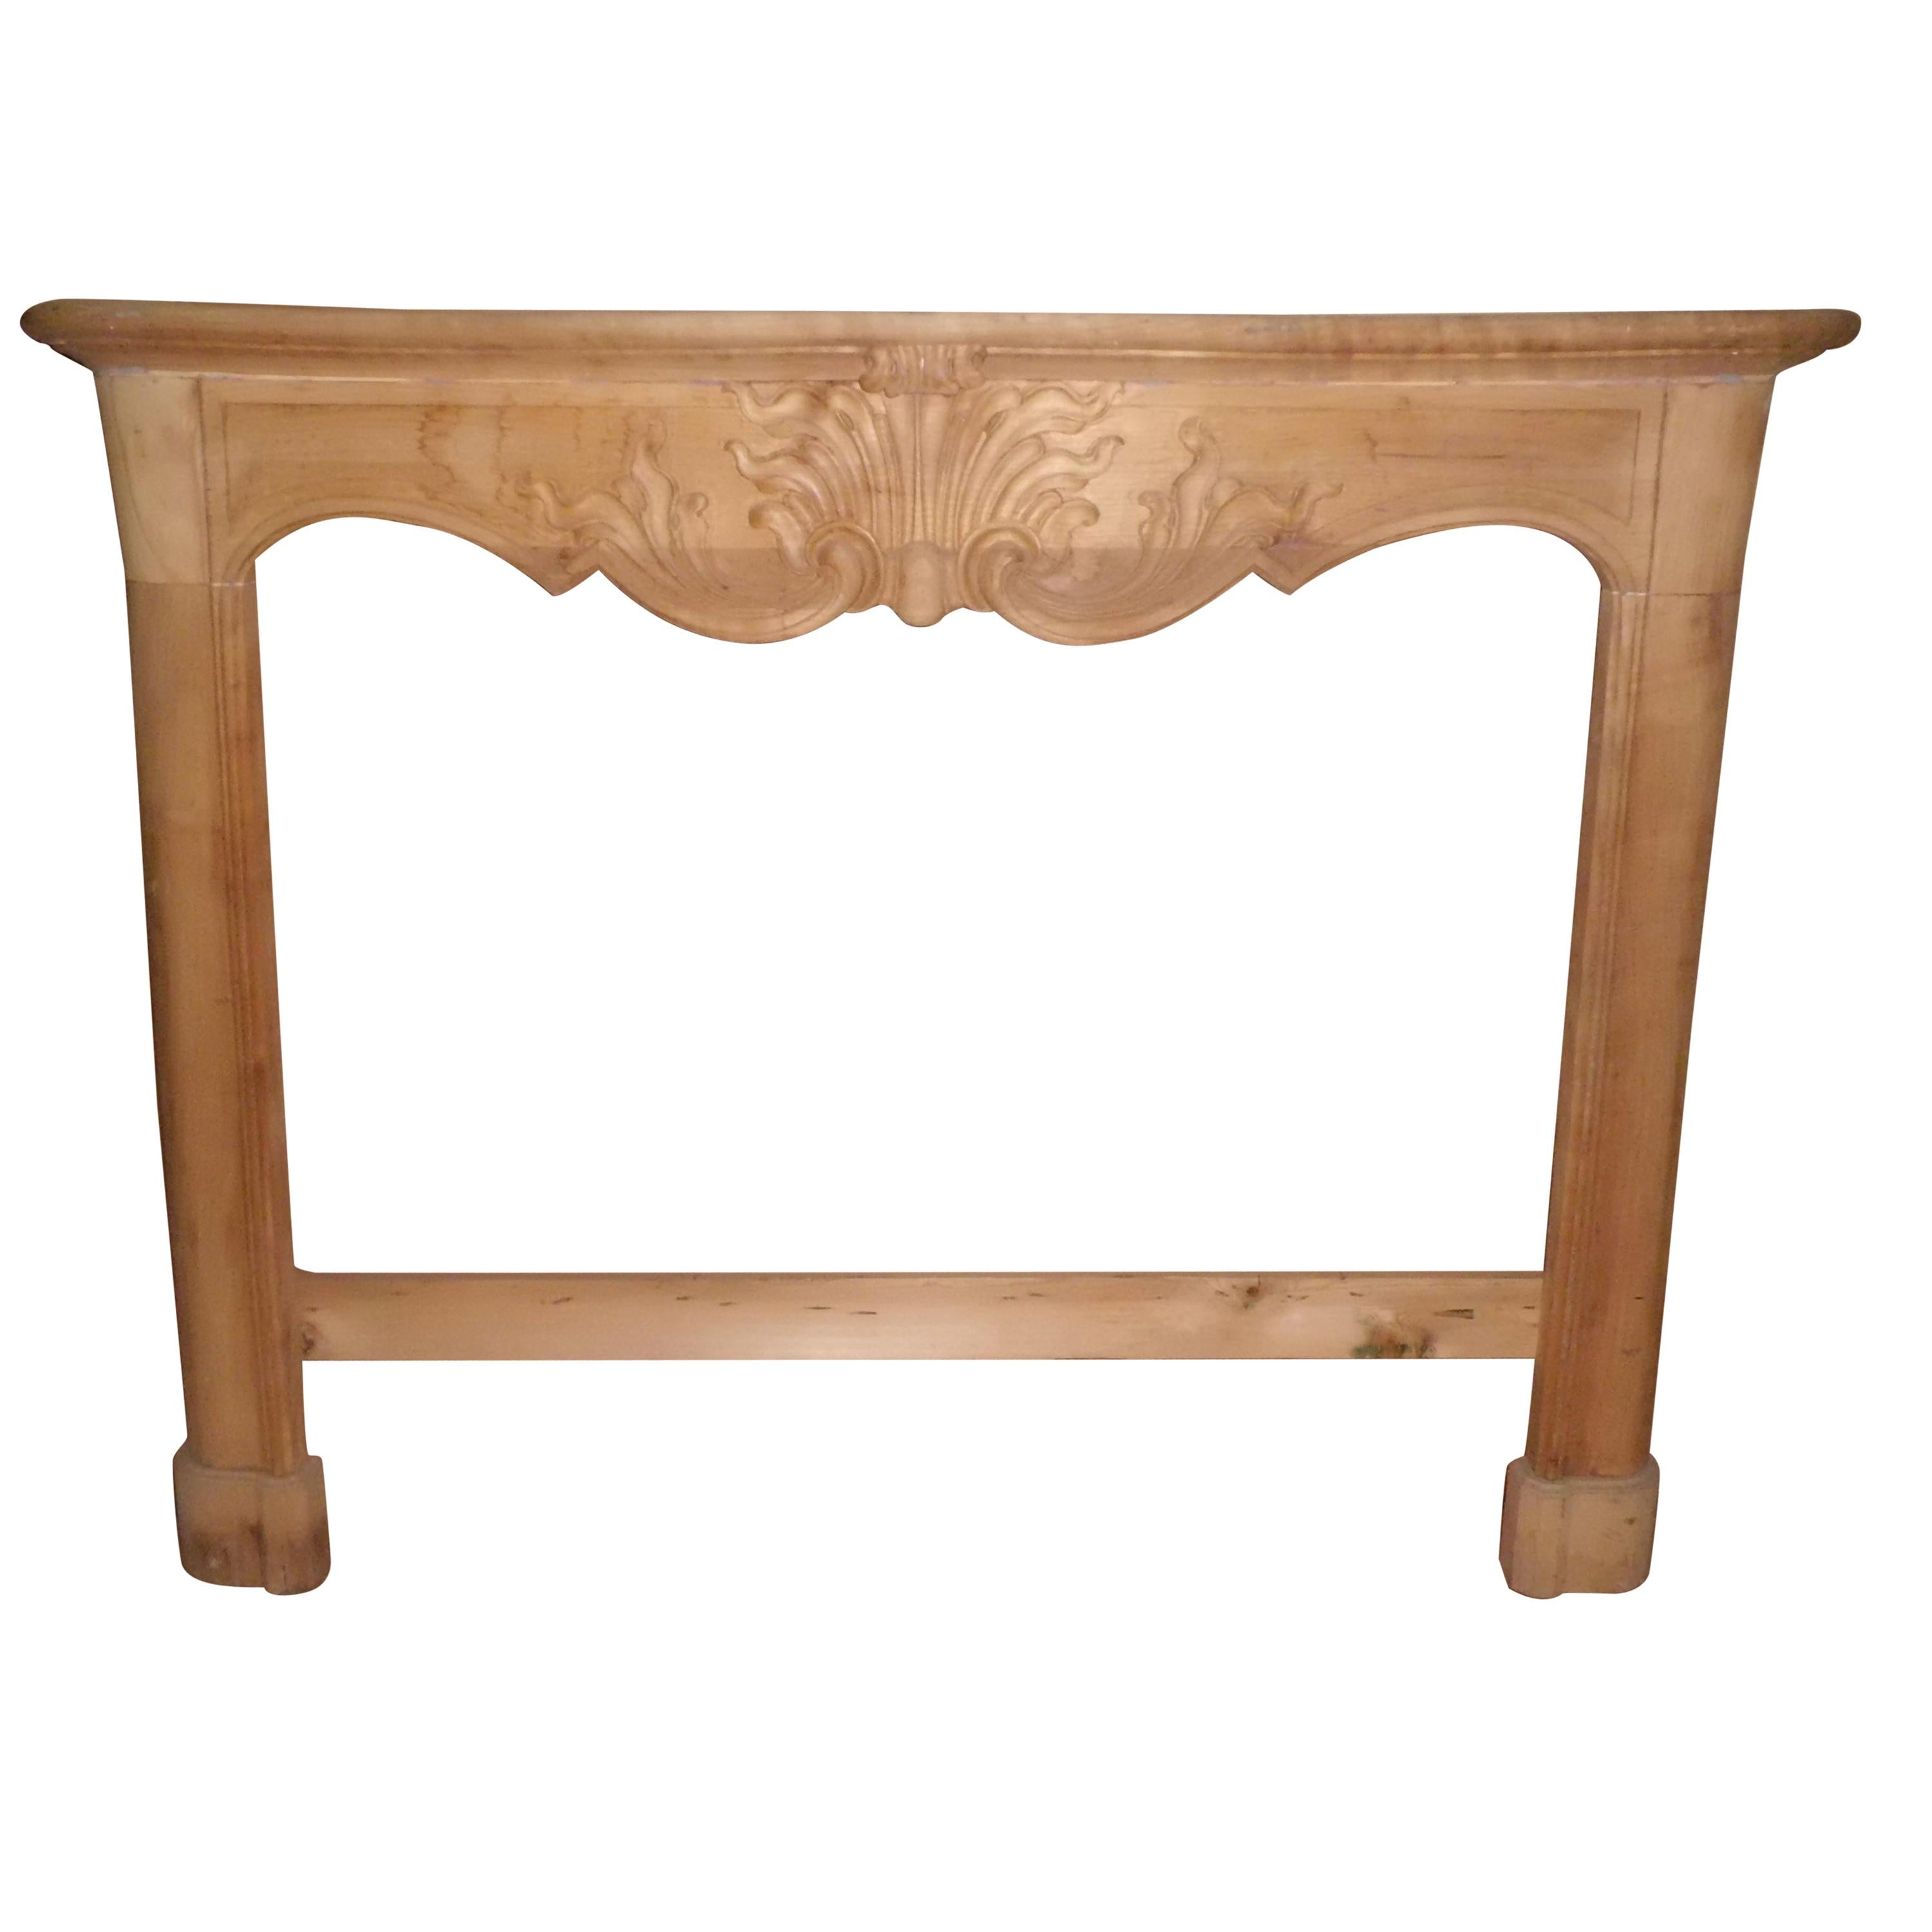 20th Century Italy 1920 Regence Style Wood Mantel For Sale